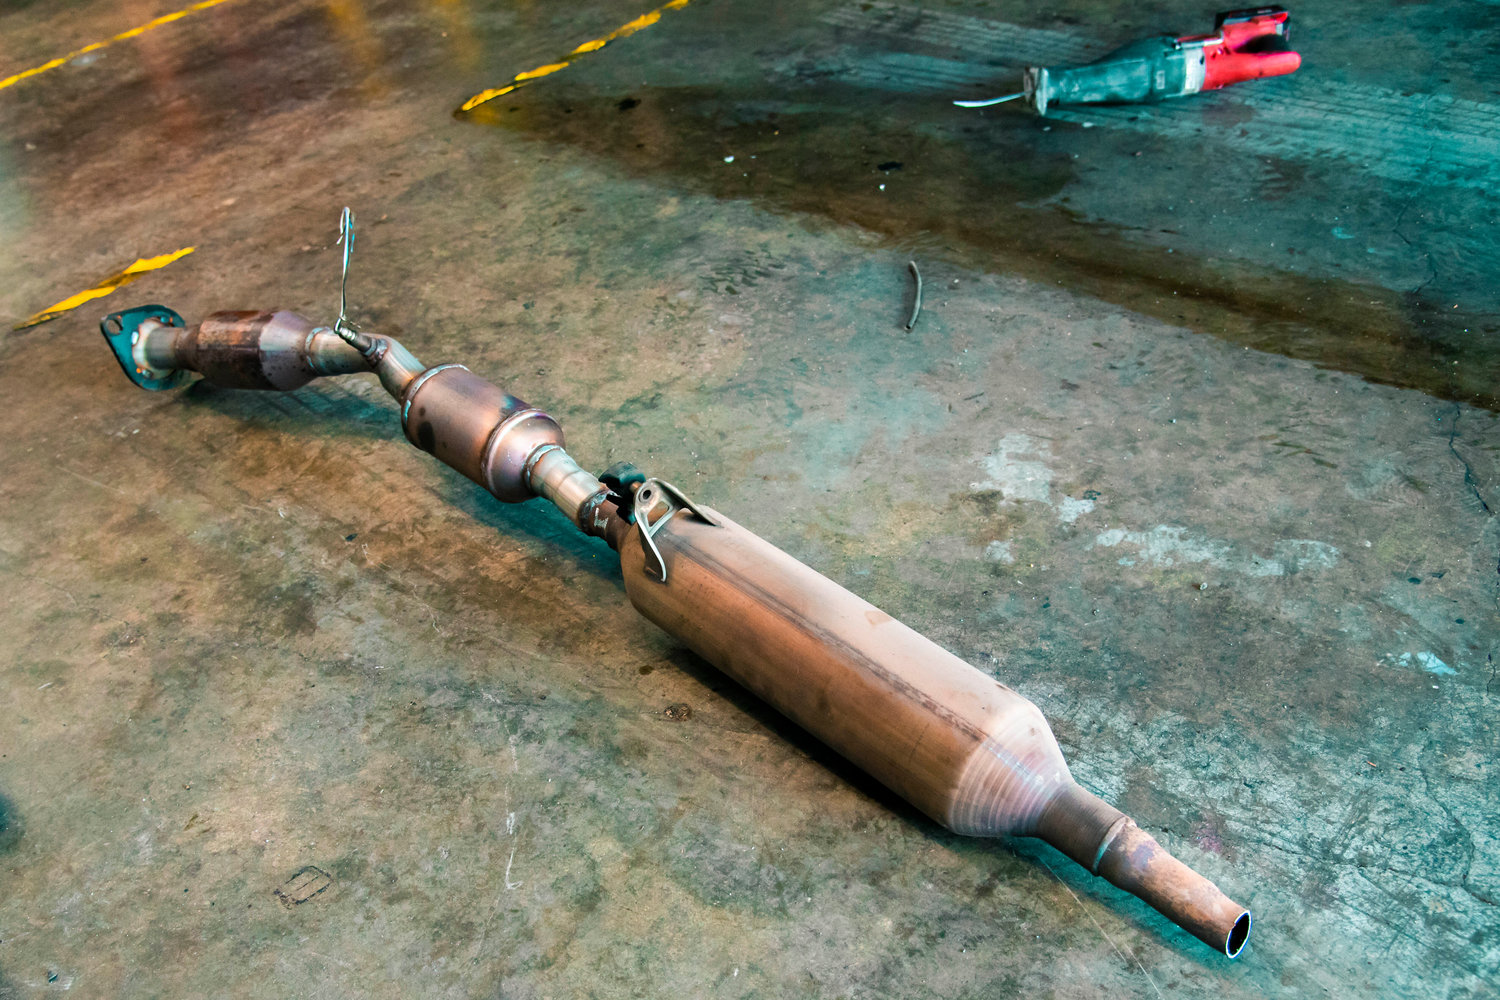 A catalytic converter from a hybrid Prius lays on the floor next to an electric reciprocating hand saw.